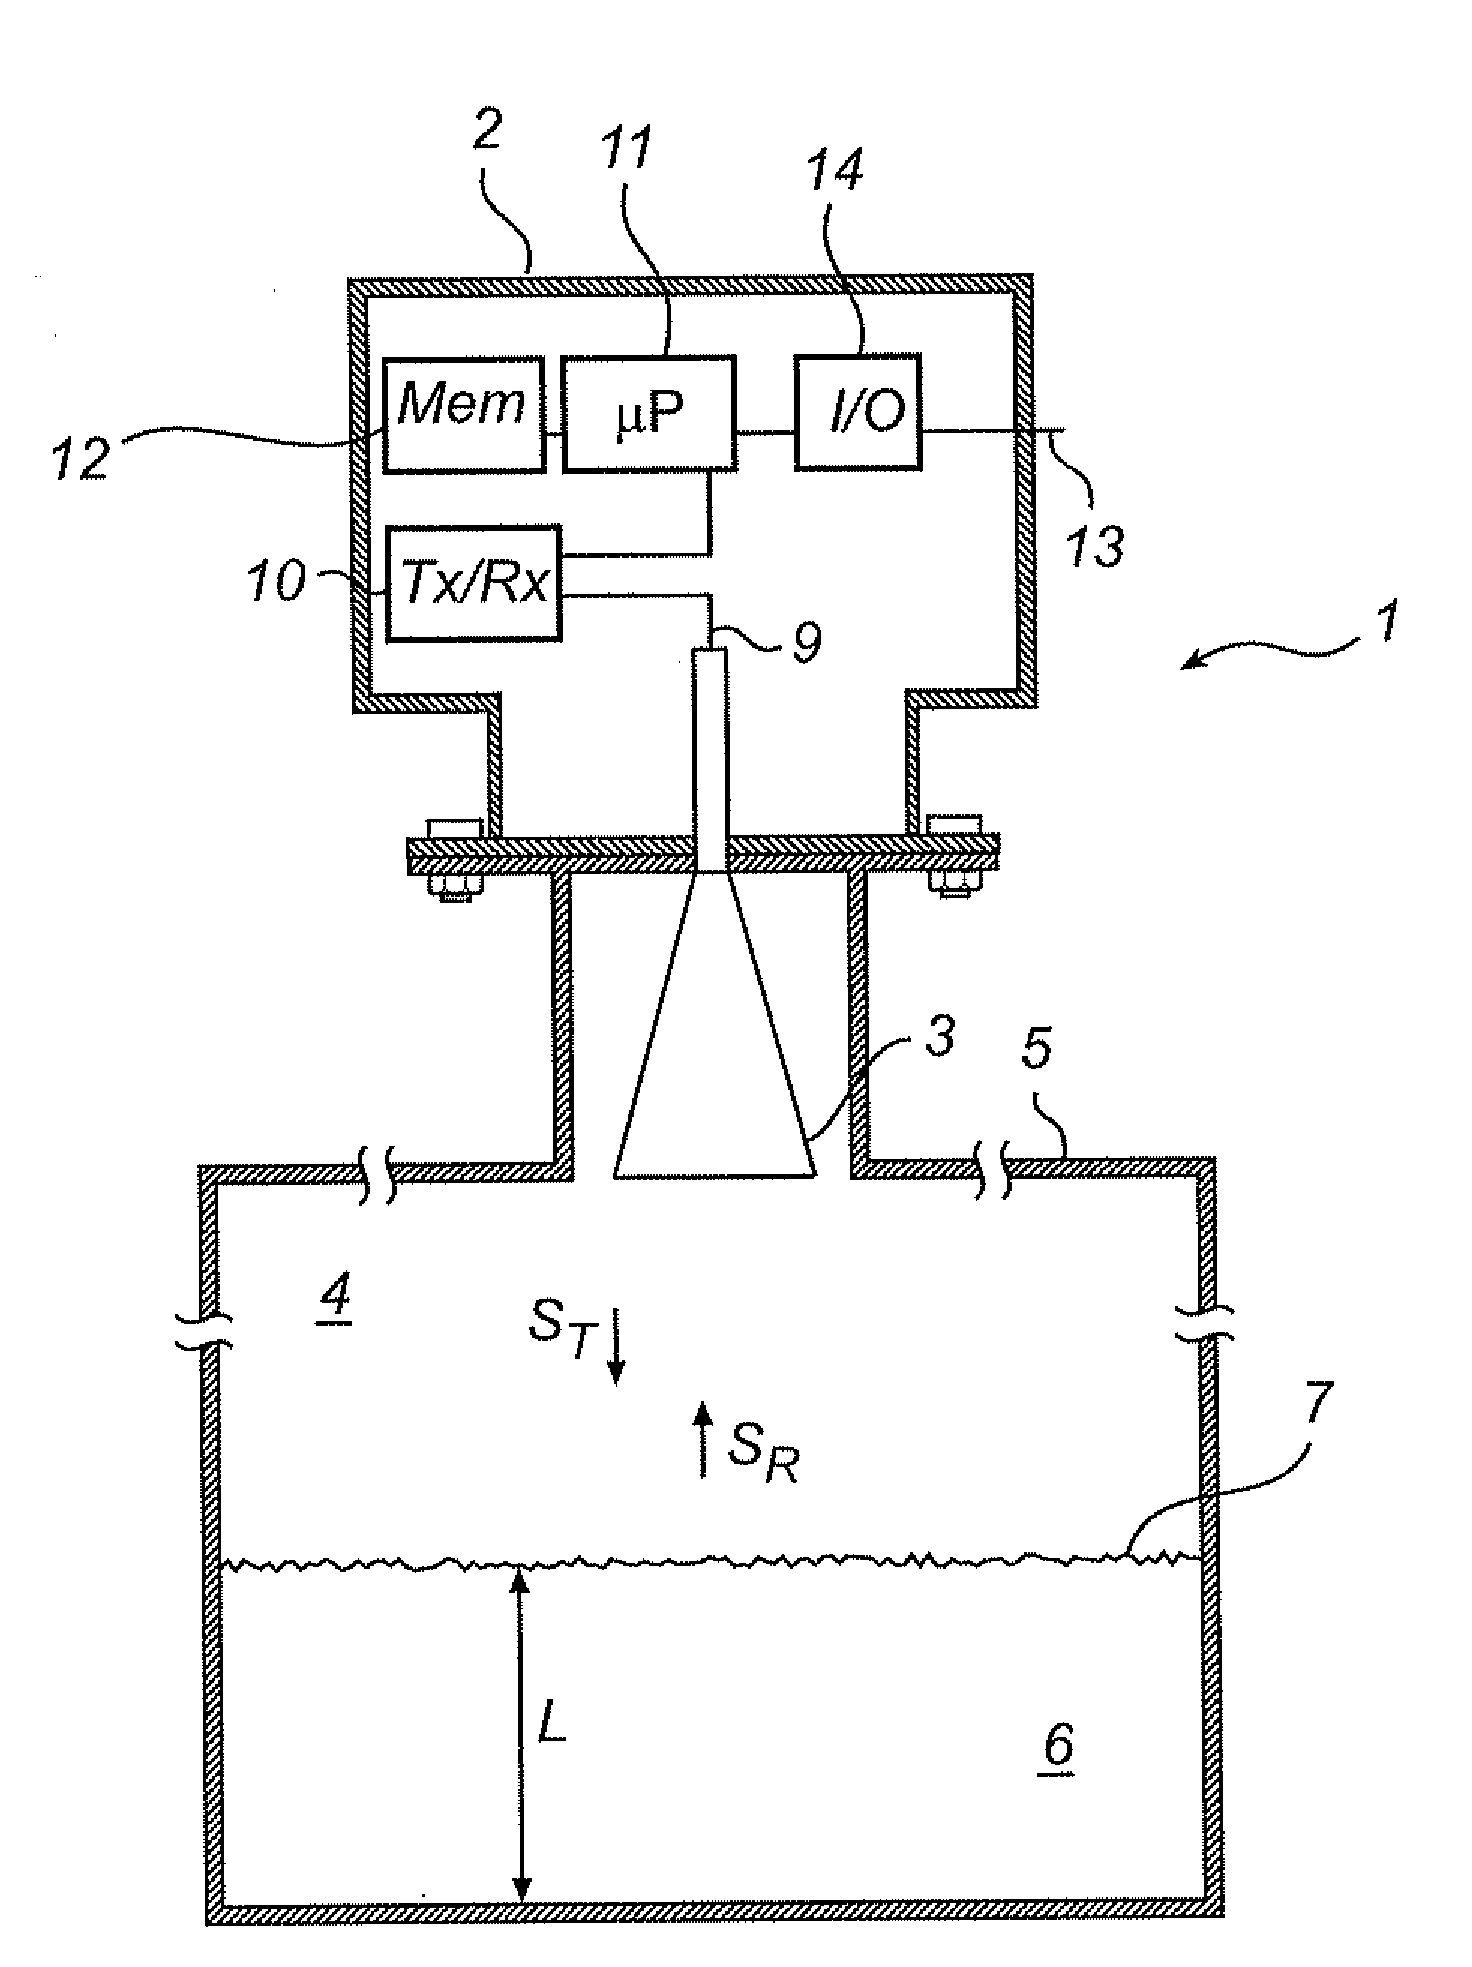 Radar level gauging using frequency modulated pulsed wave